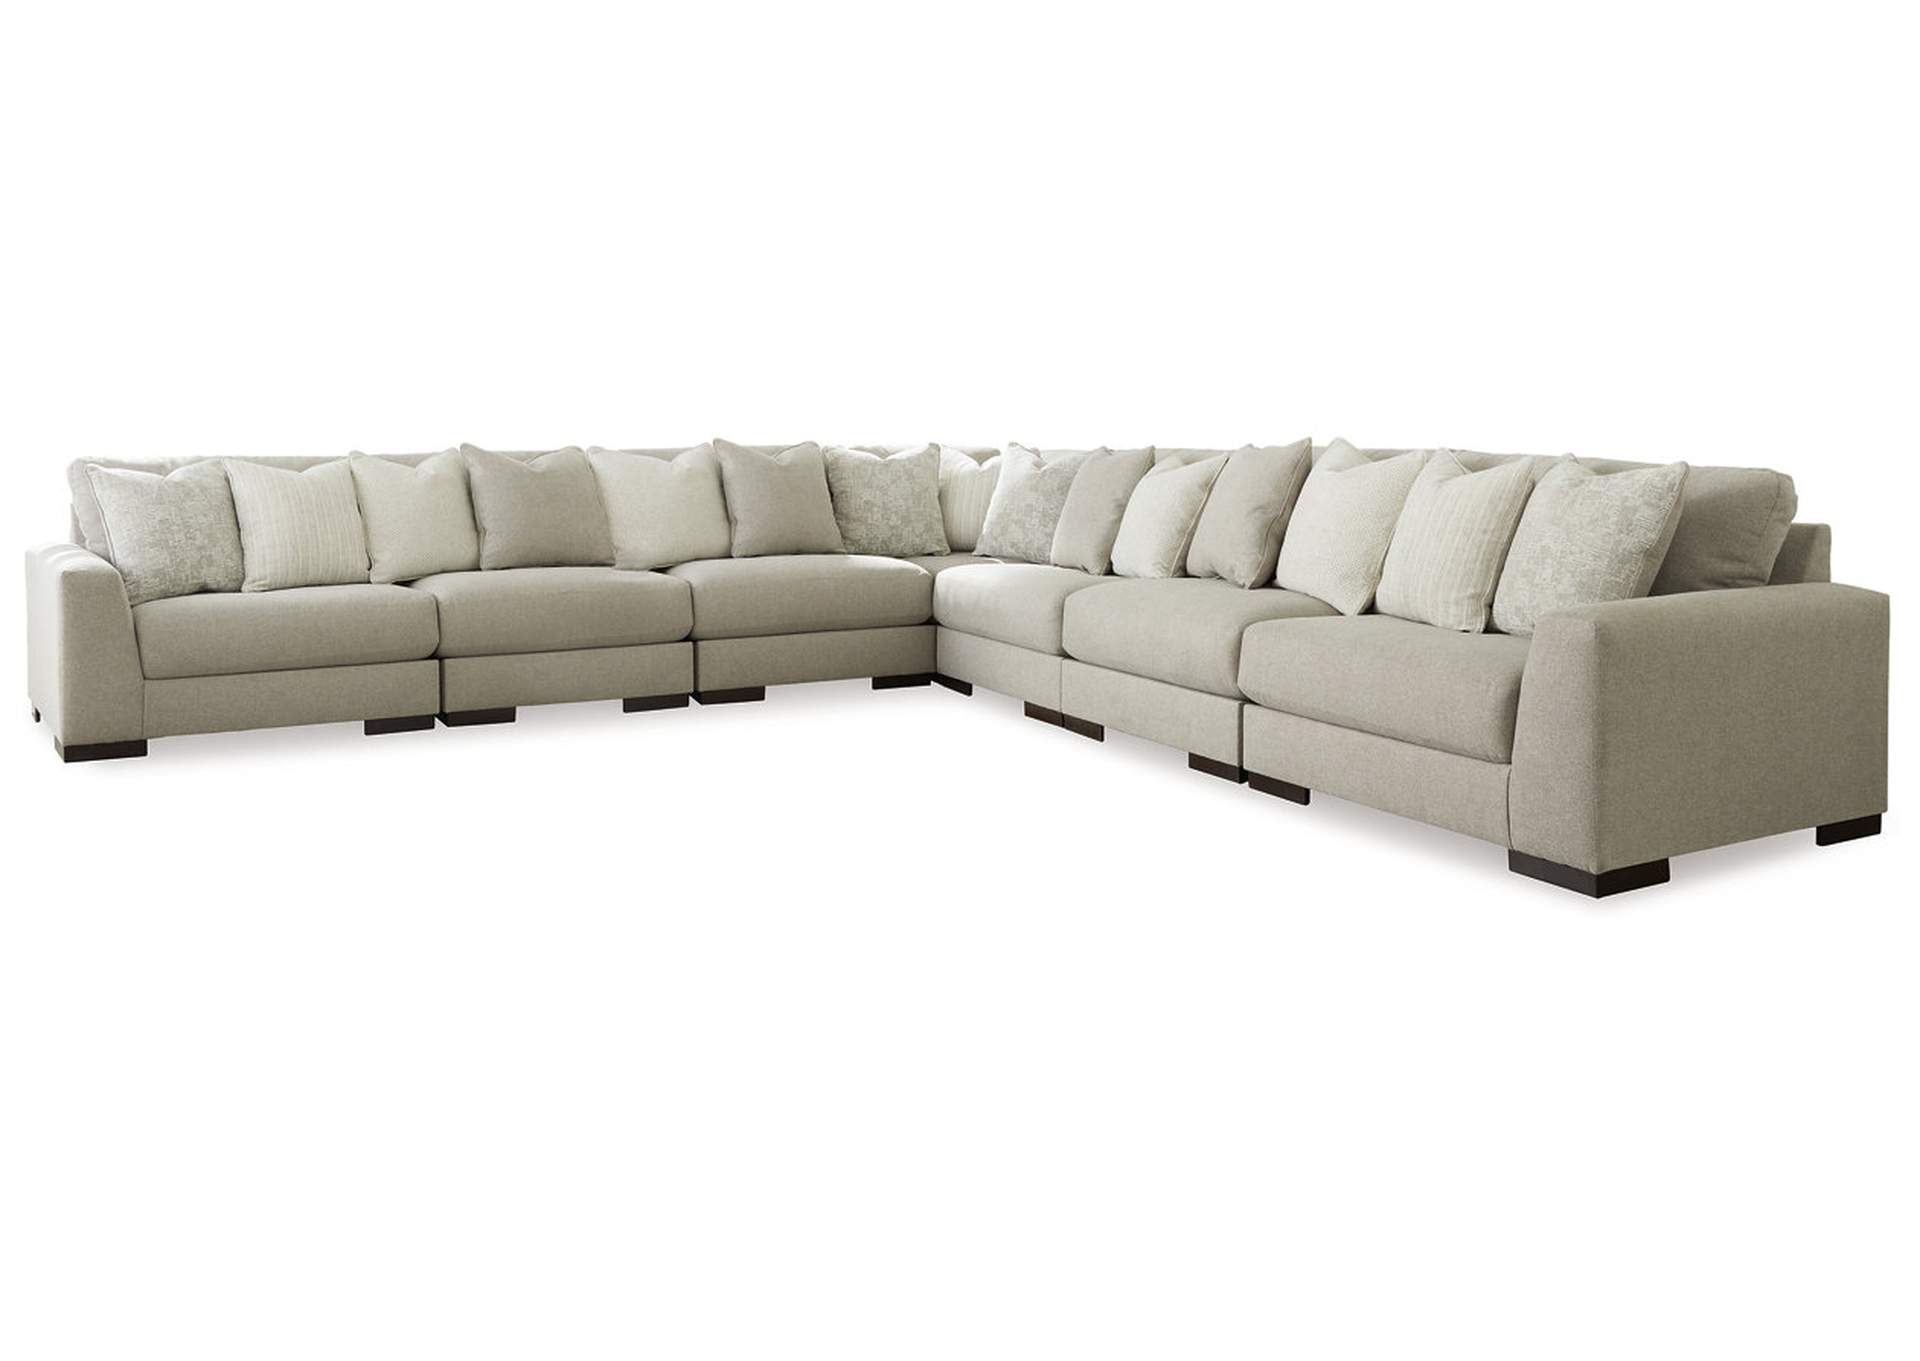 Lyndeboro 7-Piece Sectional with Ottoman,Ashley